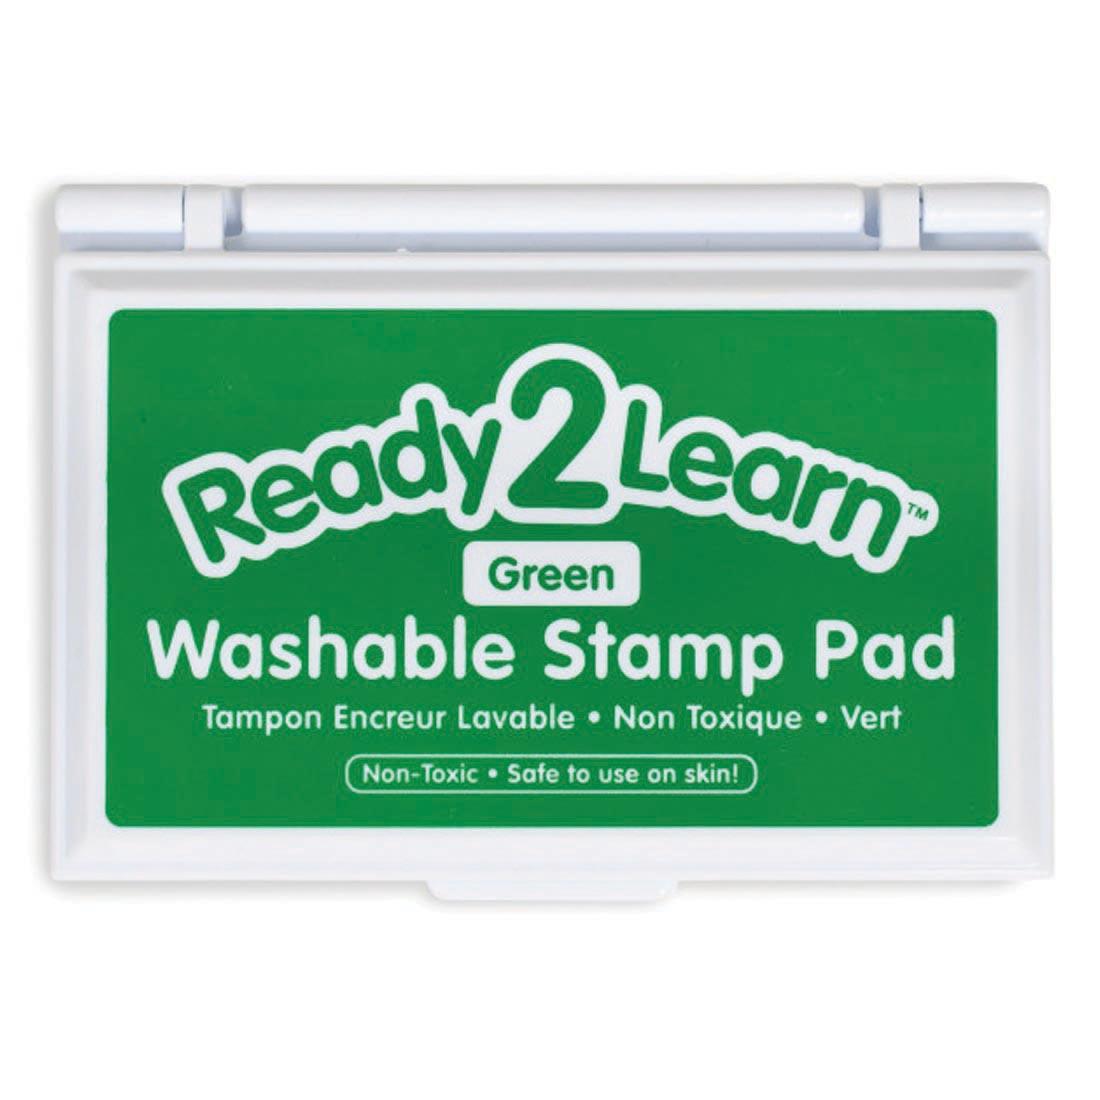 Ready 2 Learn Green Washable Stamp Pad